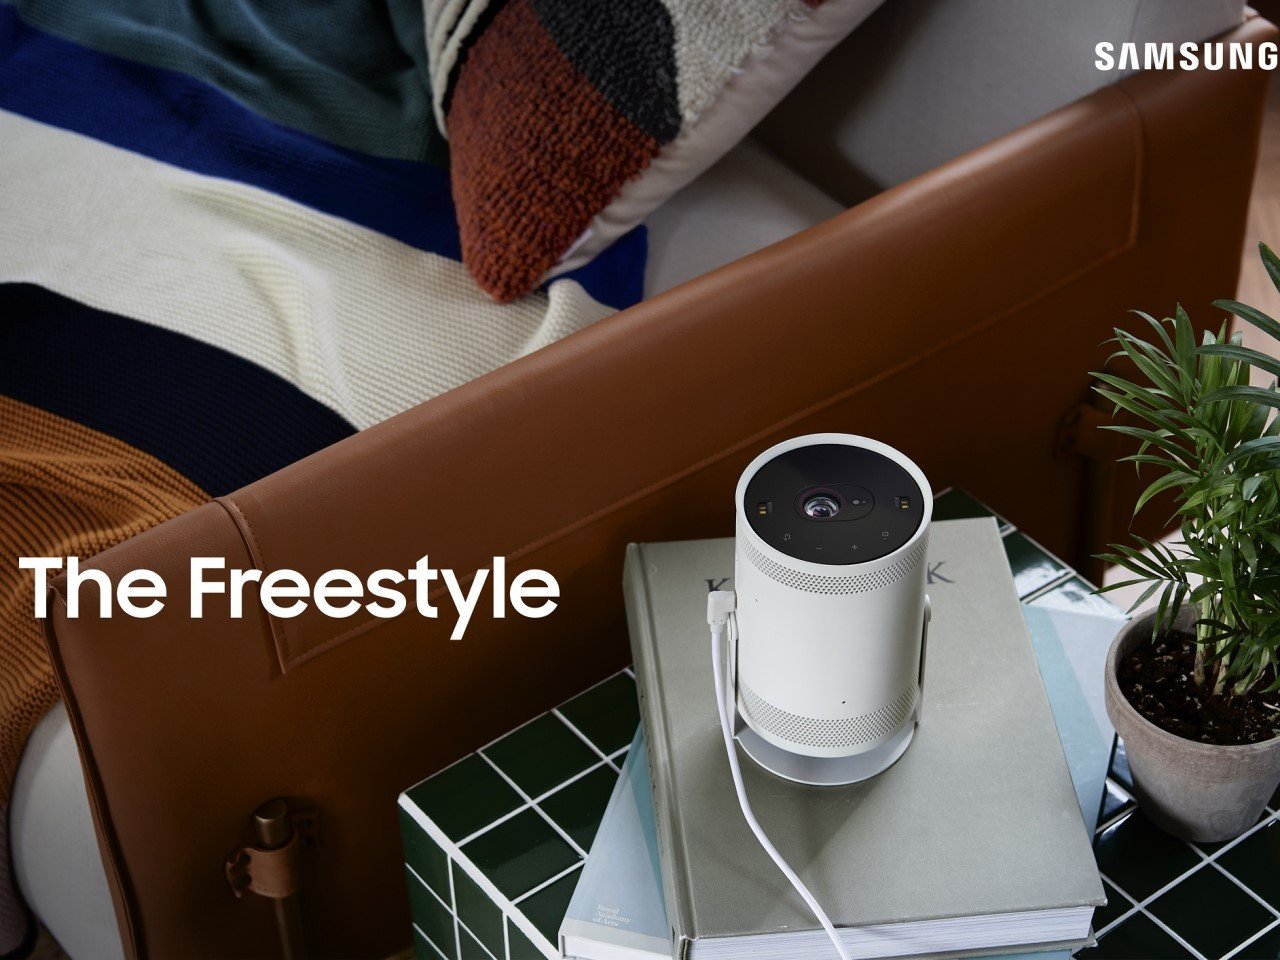 Samsung-The Freestyle-1